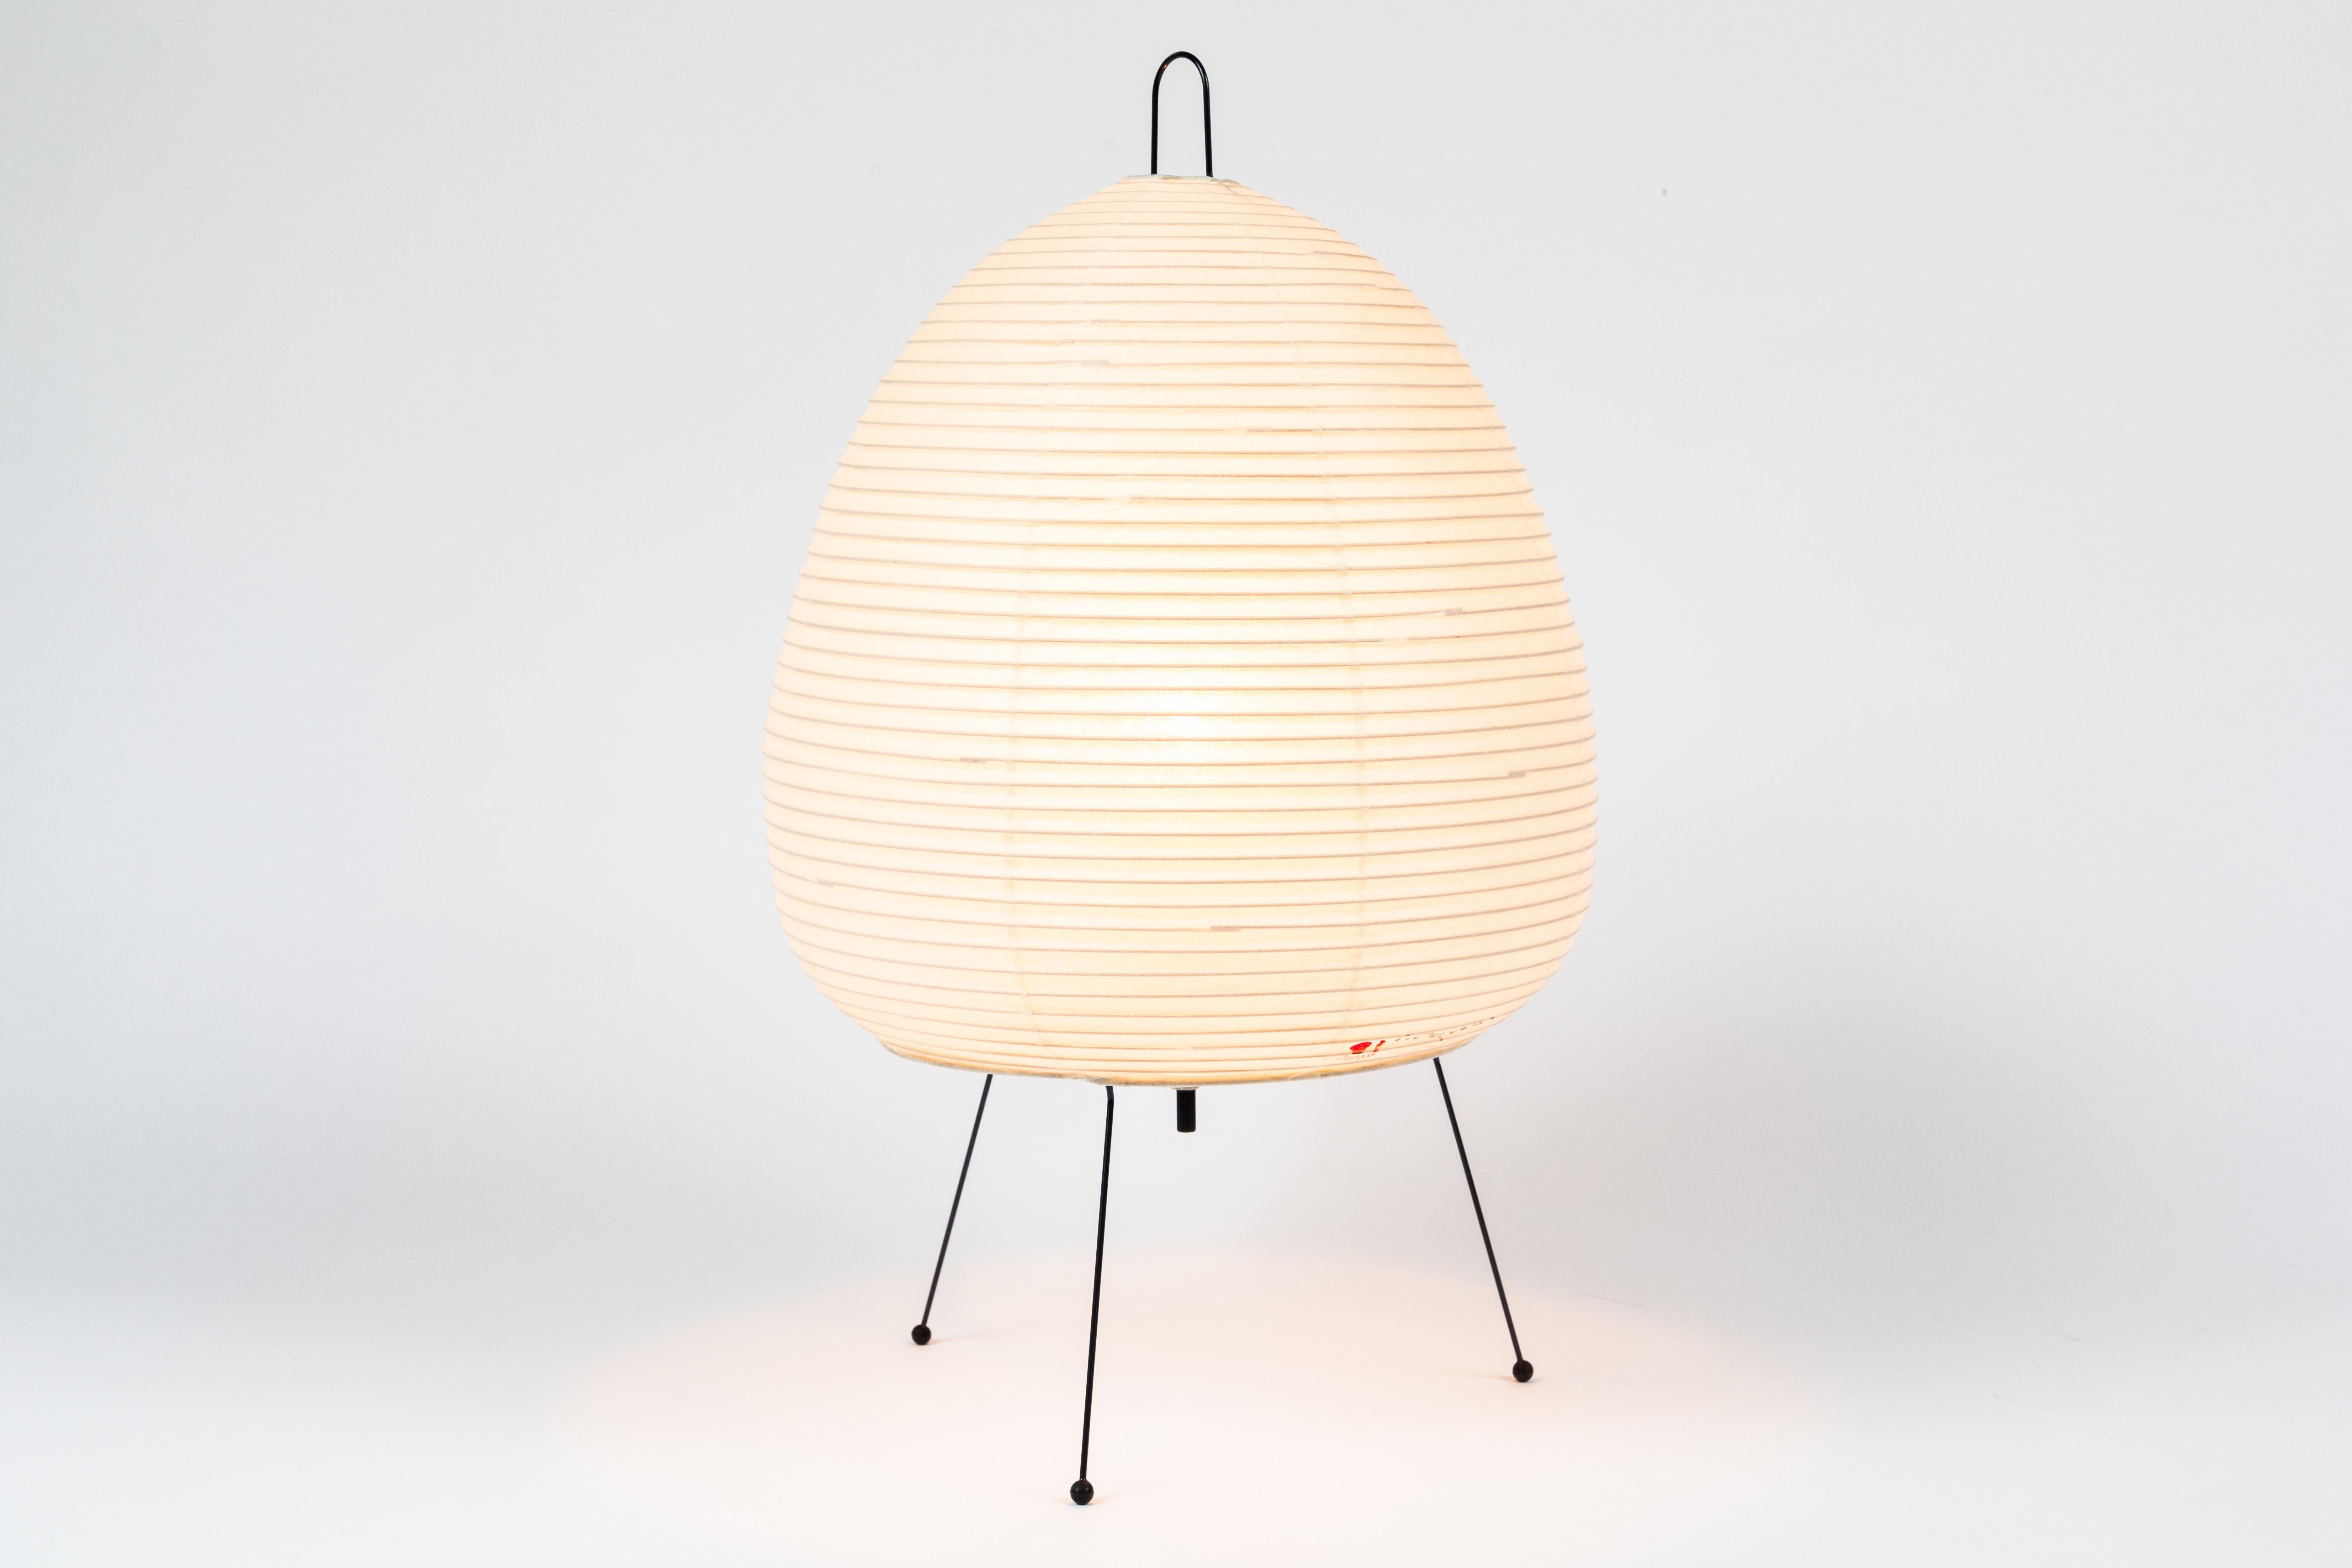 Akari model 1A light sculpture by Isamu Noguchi. The shade is made from handmade washi paper and bamboo ribs with Noguchi Akari manufacturer's stamp. Akari light sculptures by Isamu Noguchi are considered icons of 1950s modern design. Designed by